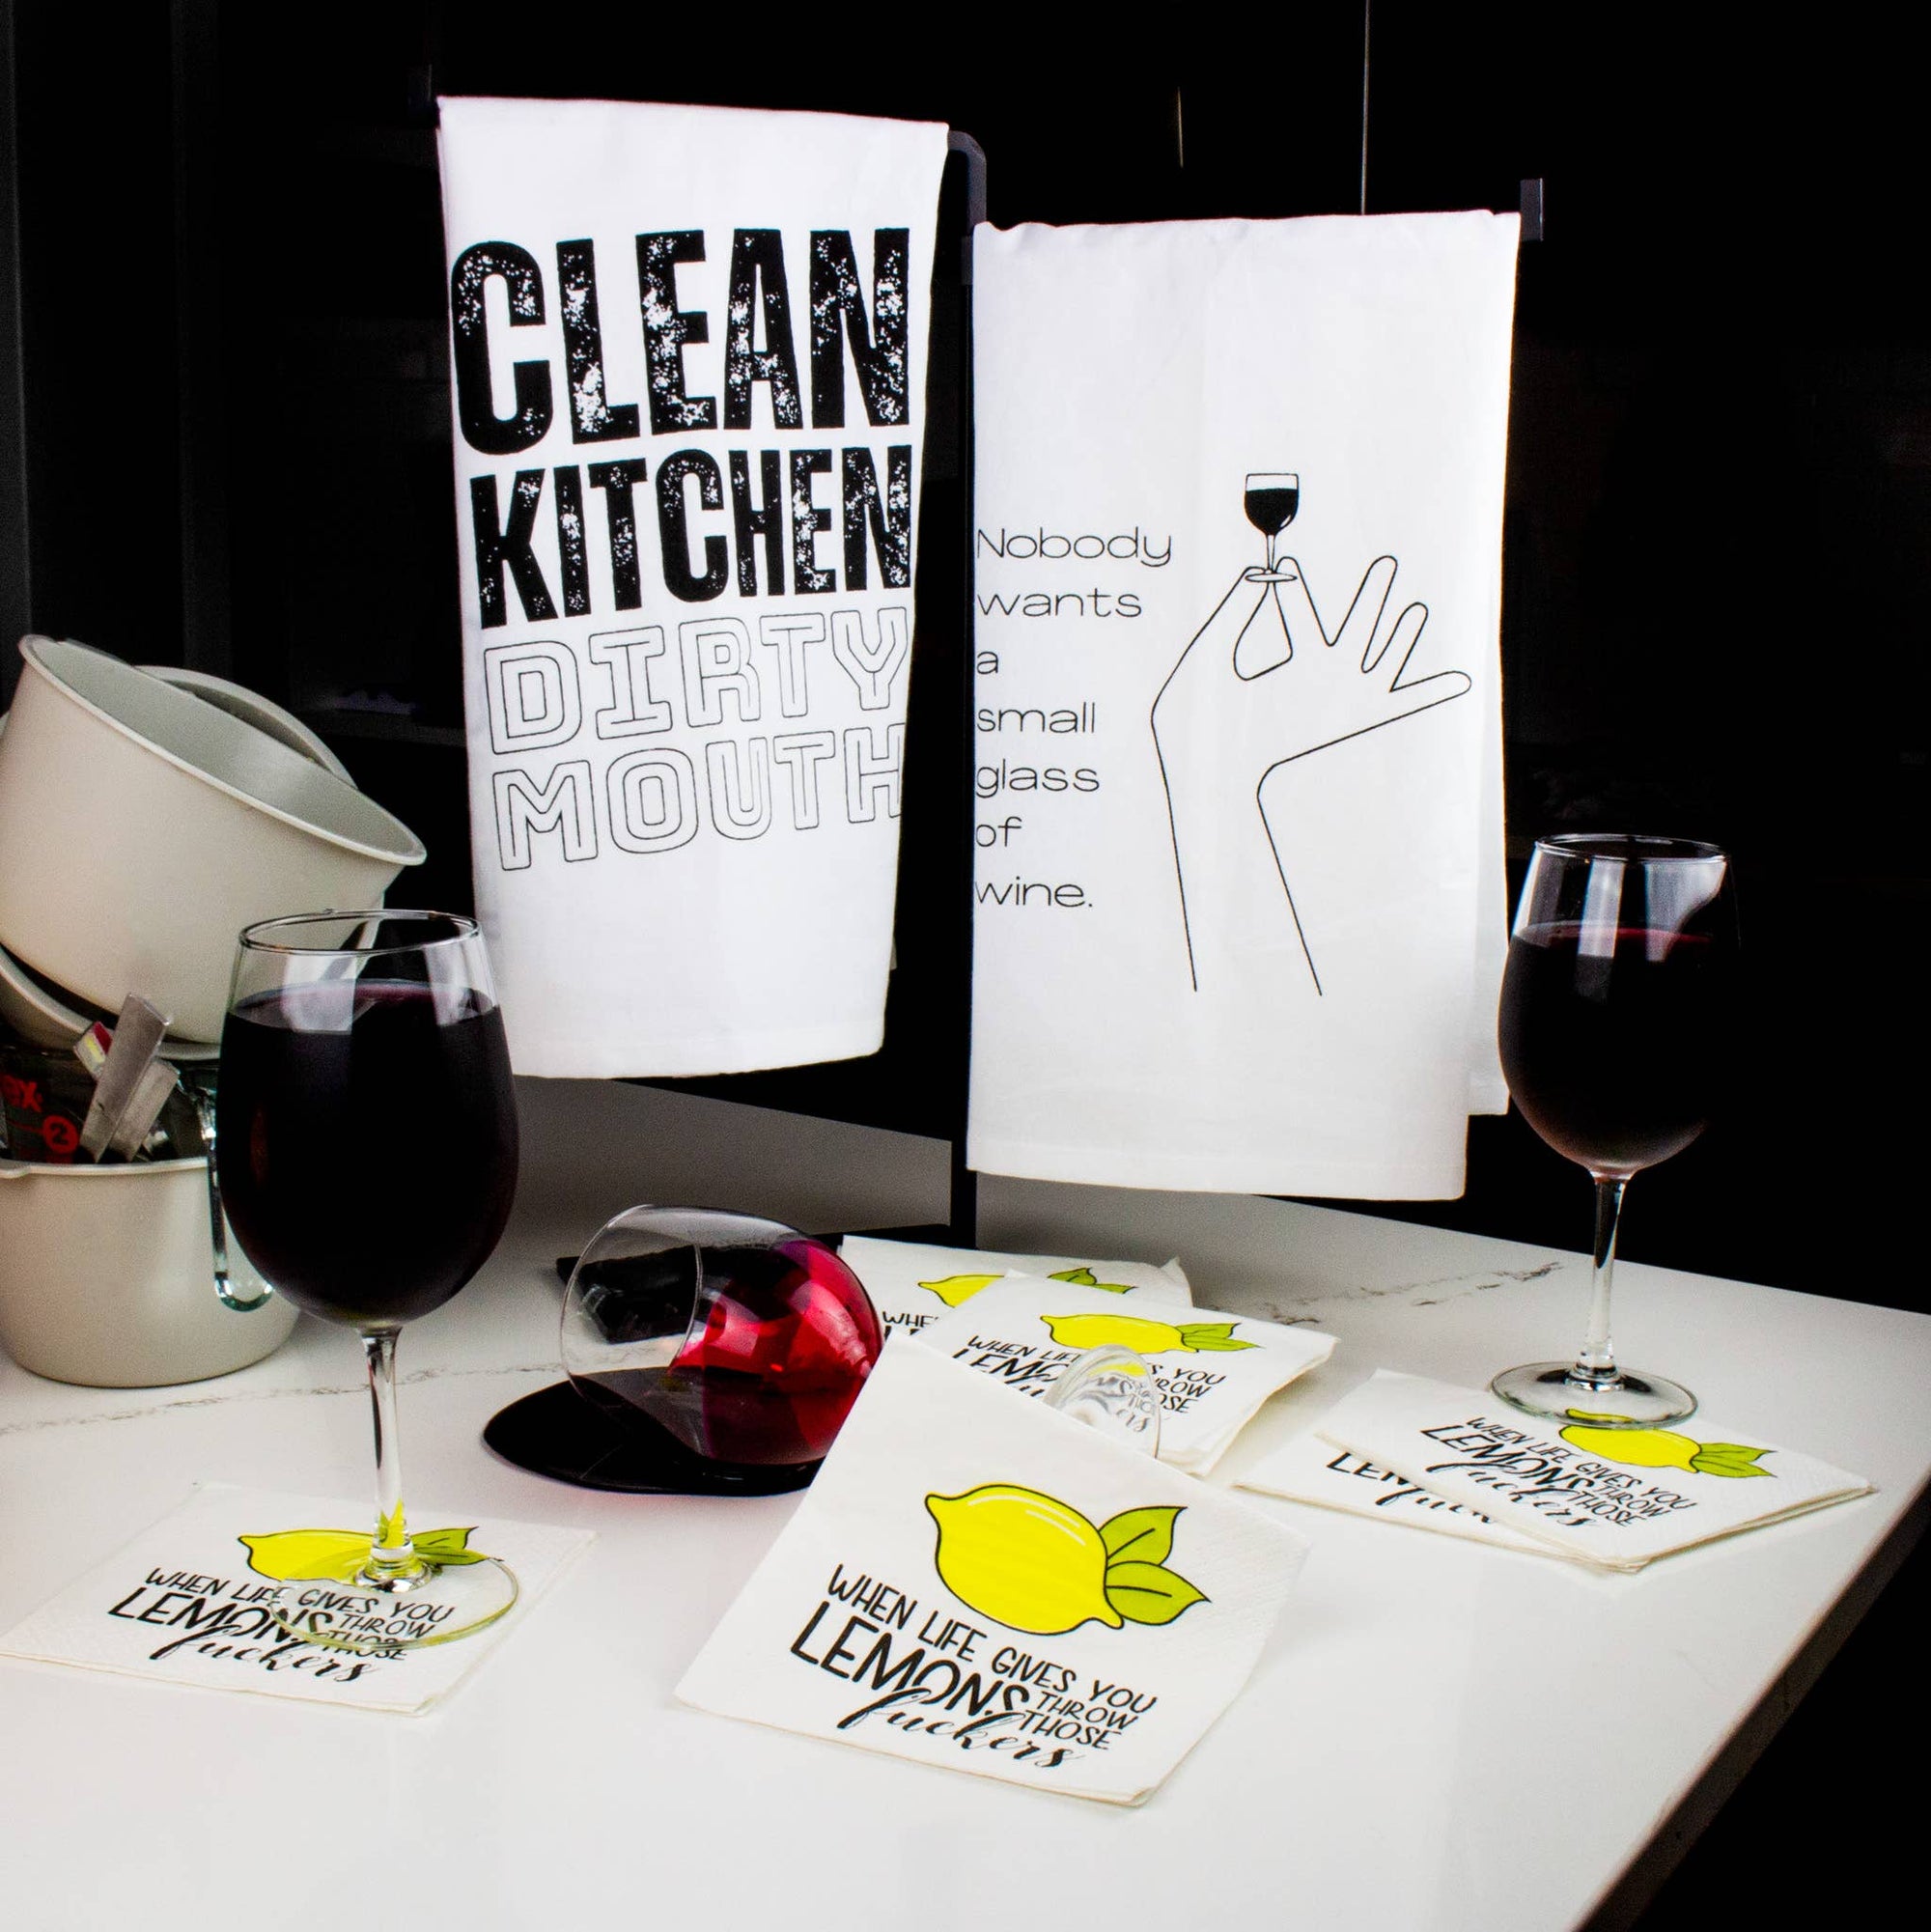 Twisted Wares - Nobody Wants A Small Glass of Wine | Funny Kitchen Towels